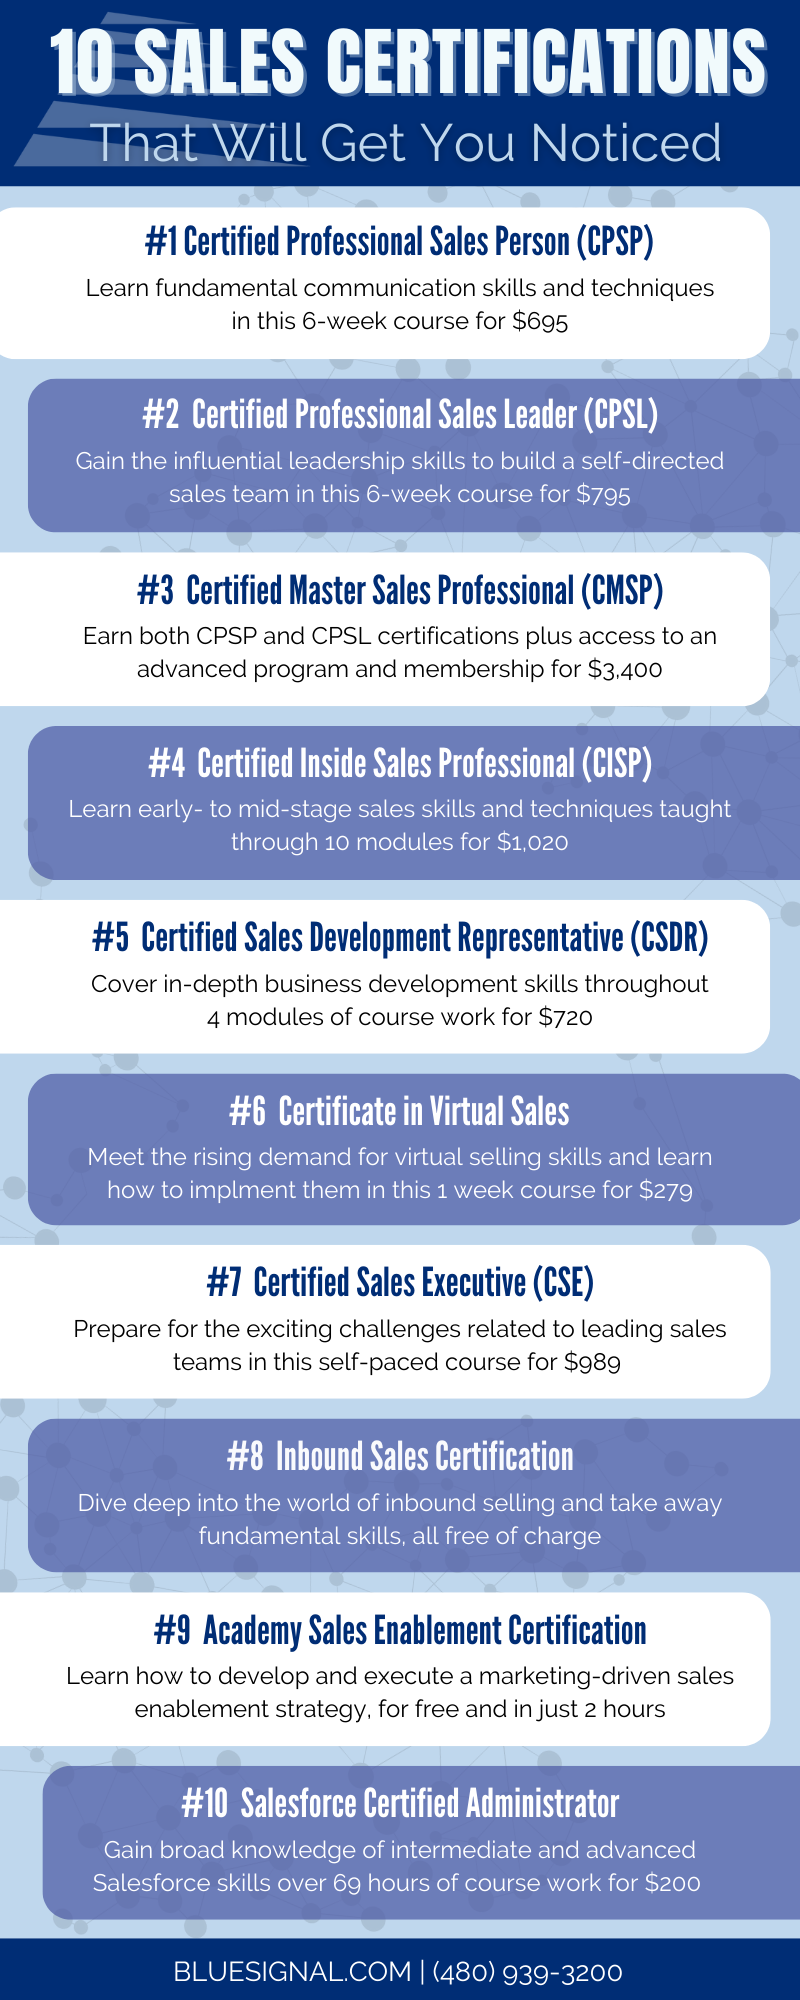 Sales Recruiters - Sales Certifications Guide